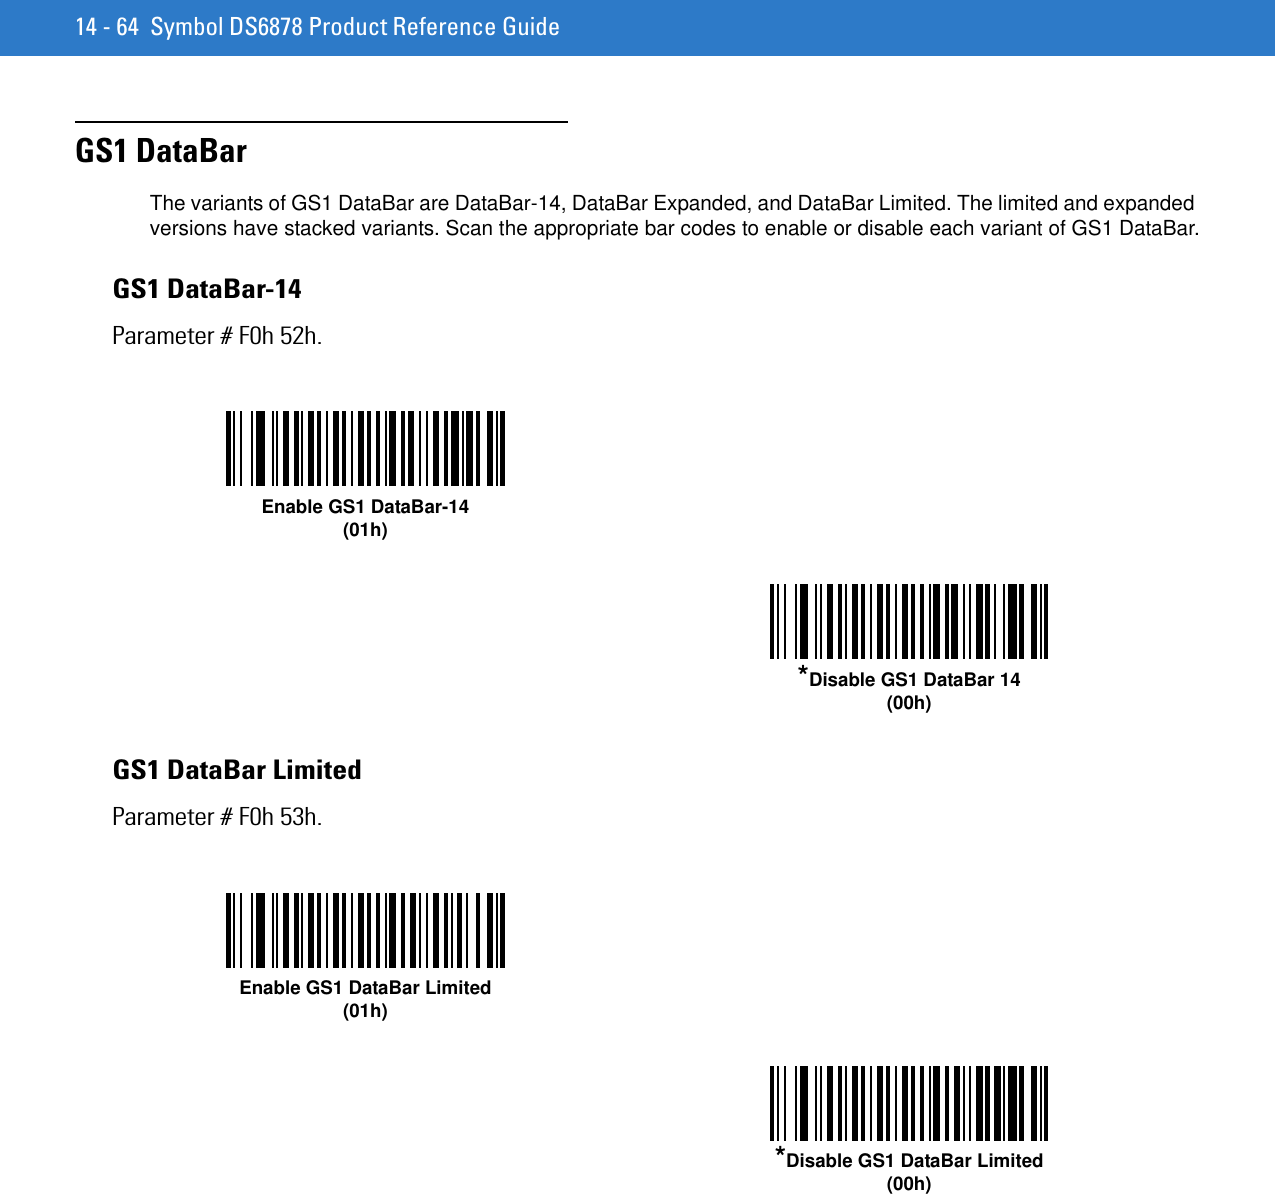 14 - 64 Symbol DS6878 Product Reference GuideGS1 DataBarThe variants of GS1 DataBar are DataBar-14, DataBar Expanded, and DataBar Limited. The limited and expanded versions have stacked variants. Scan the appropriate bar codes to enable or disable each variant of GS1 DataBar.GS1 DataBar-14Parameter # F0h 52h.GS1 DataBar LimitedParameter # F0h 53h.Enable GS1 DataBar-14(01h)*Disable GS1 DataBar 14(00h)Enable GS1 DataBar Limited(01h)*Disable GS1 DataBar Limited(00h)